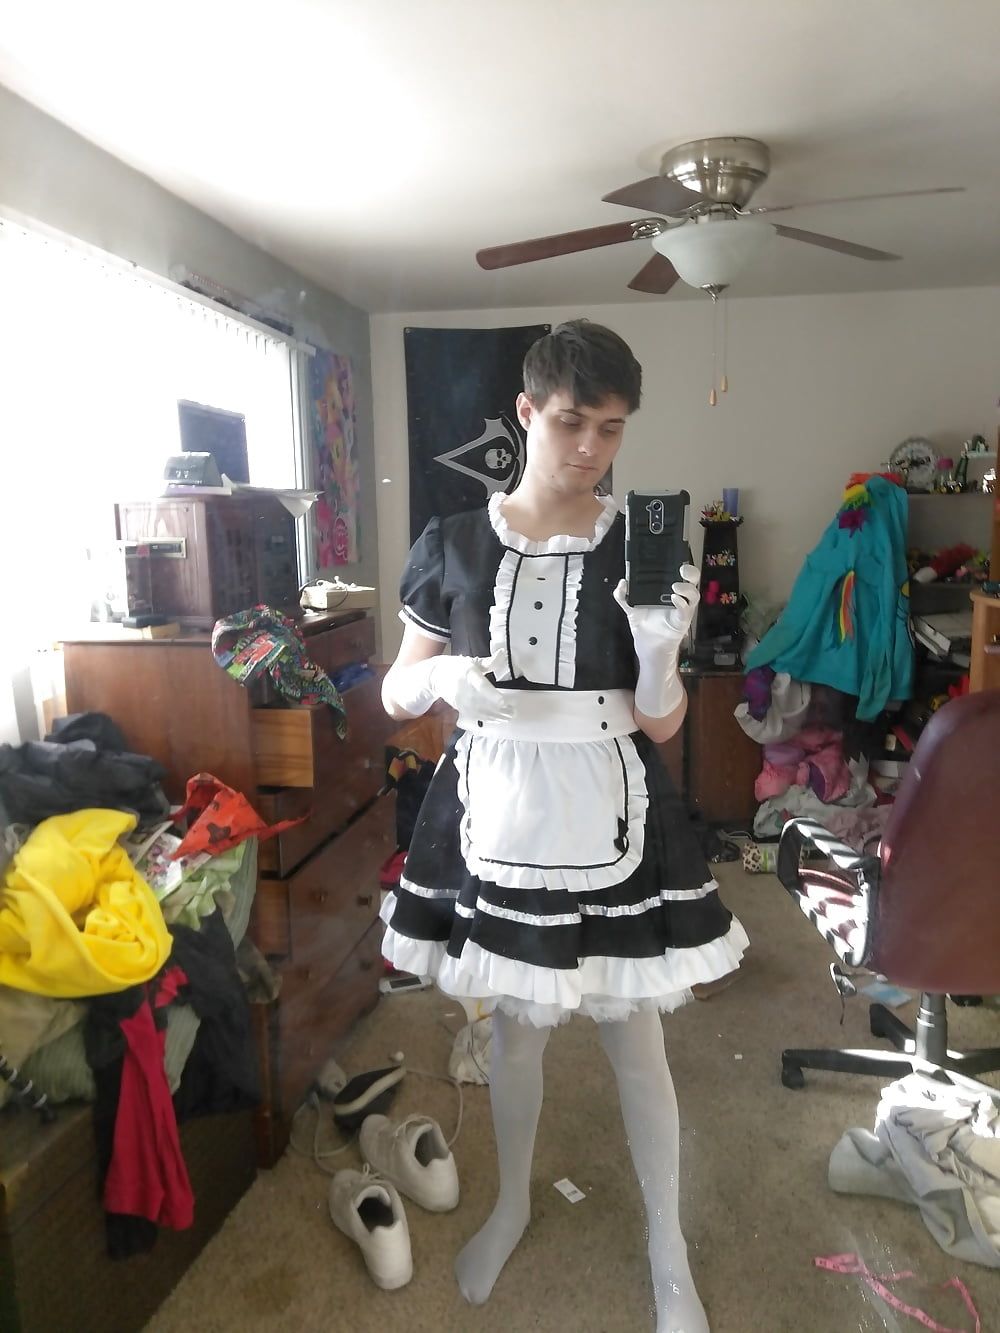 New maids outfit pics and updates #4